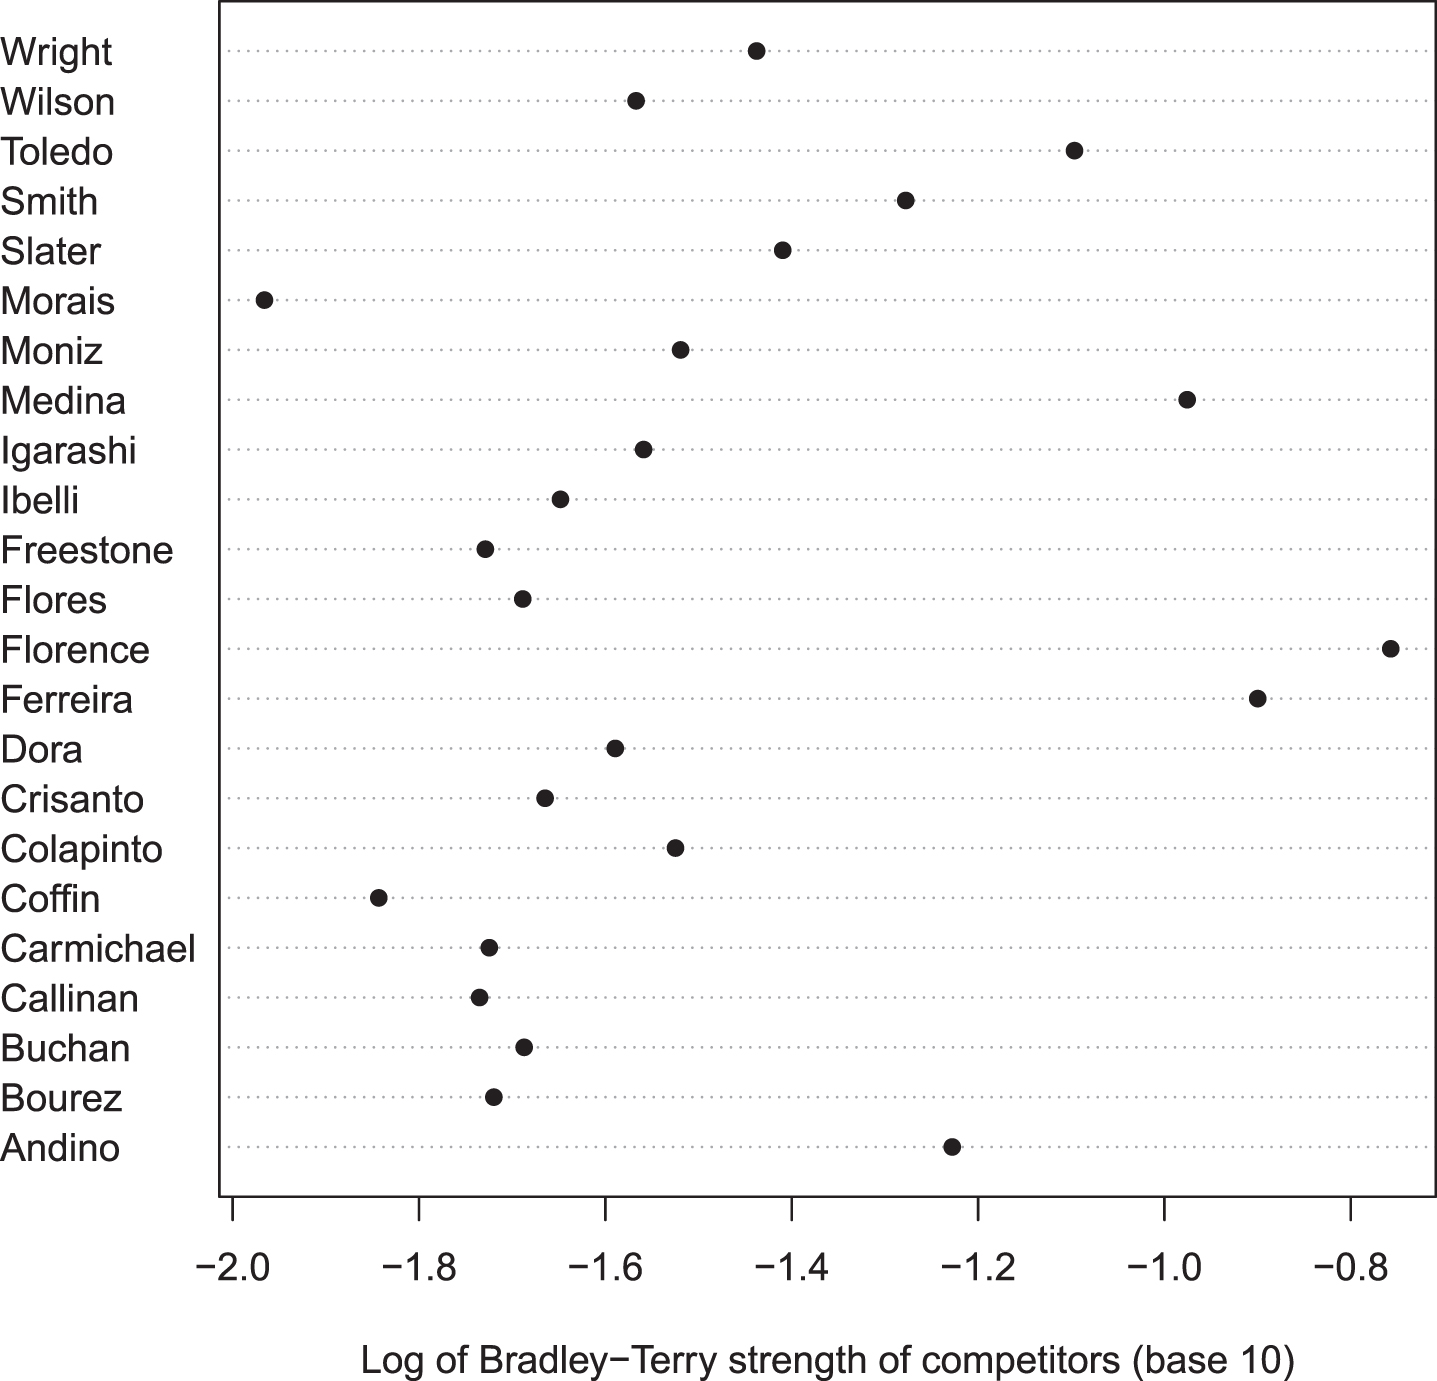 Dot chartshowing maximum likelihood strengths of the 23 competitors in alphabetic order, logarithmic axis. Note the dominance of Ferreira, Florence, and Medina